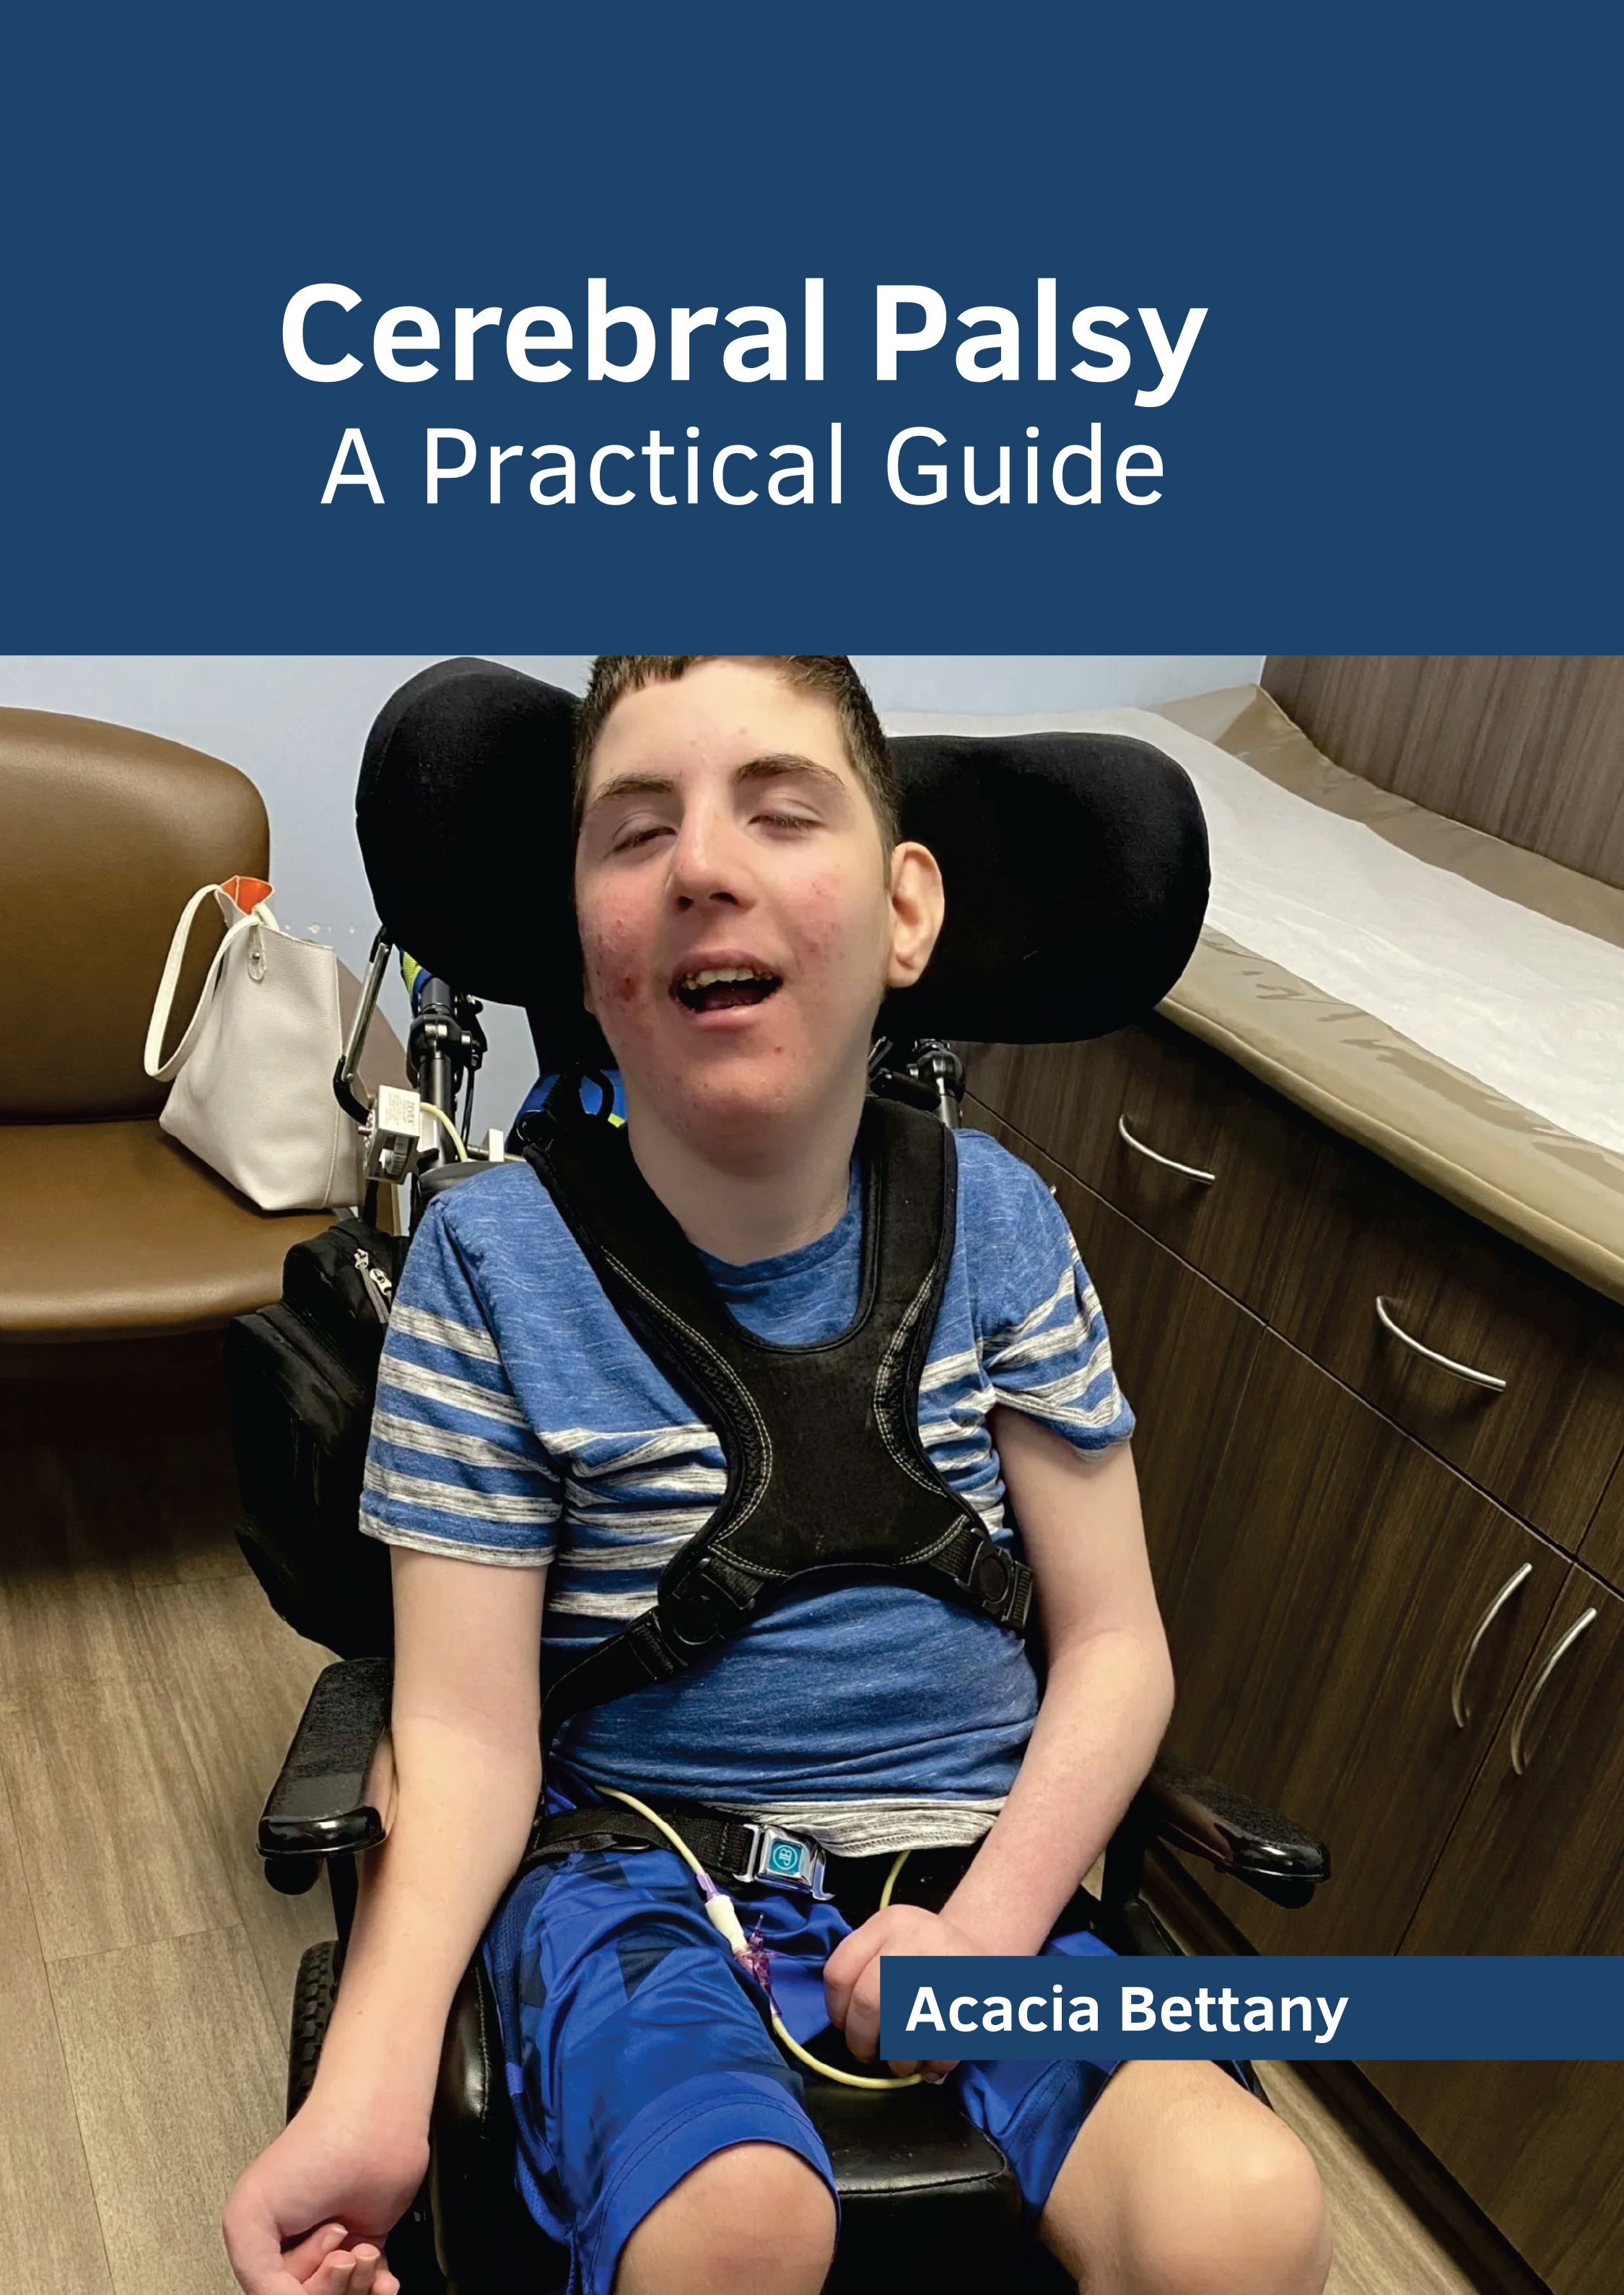 CEREBRAL PALSY: A PRACTICAL GUIDE